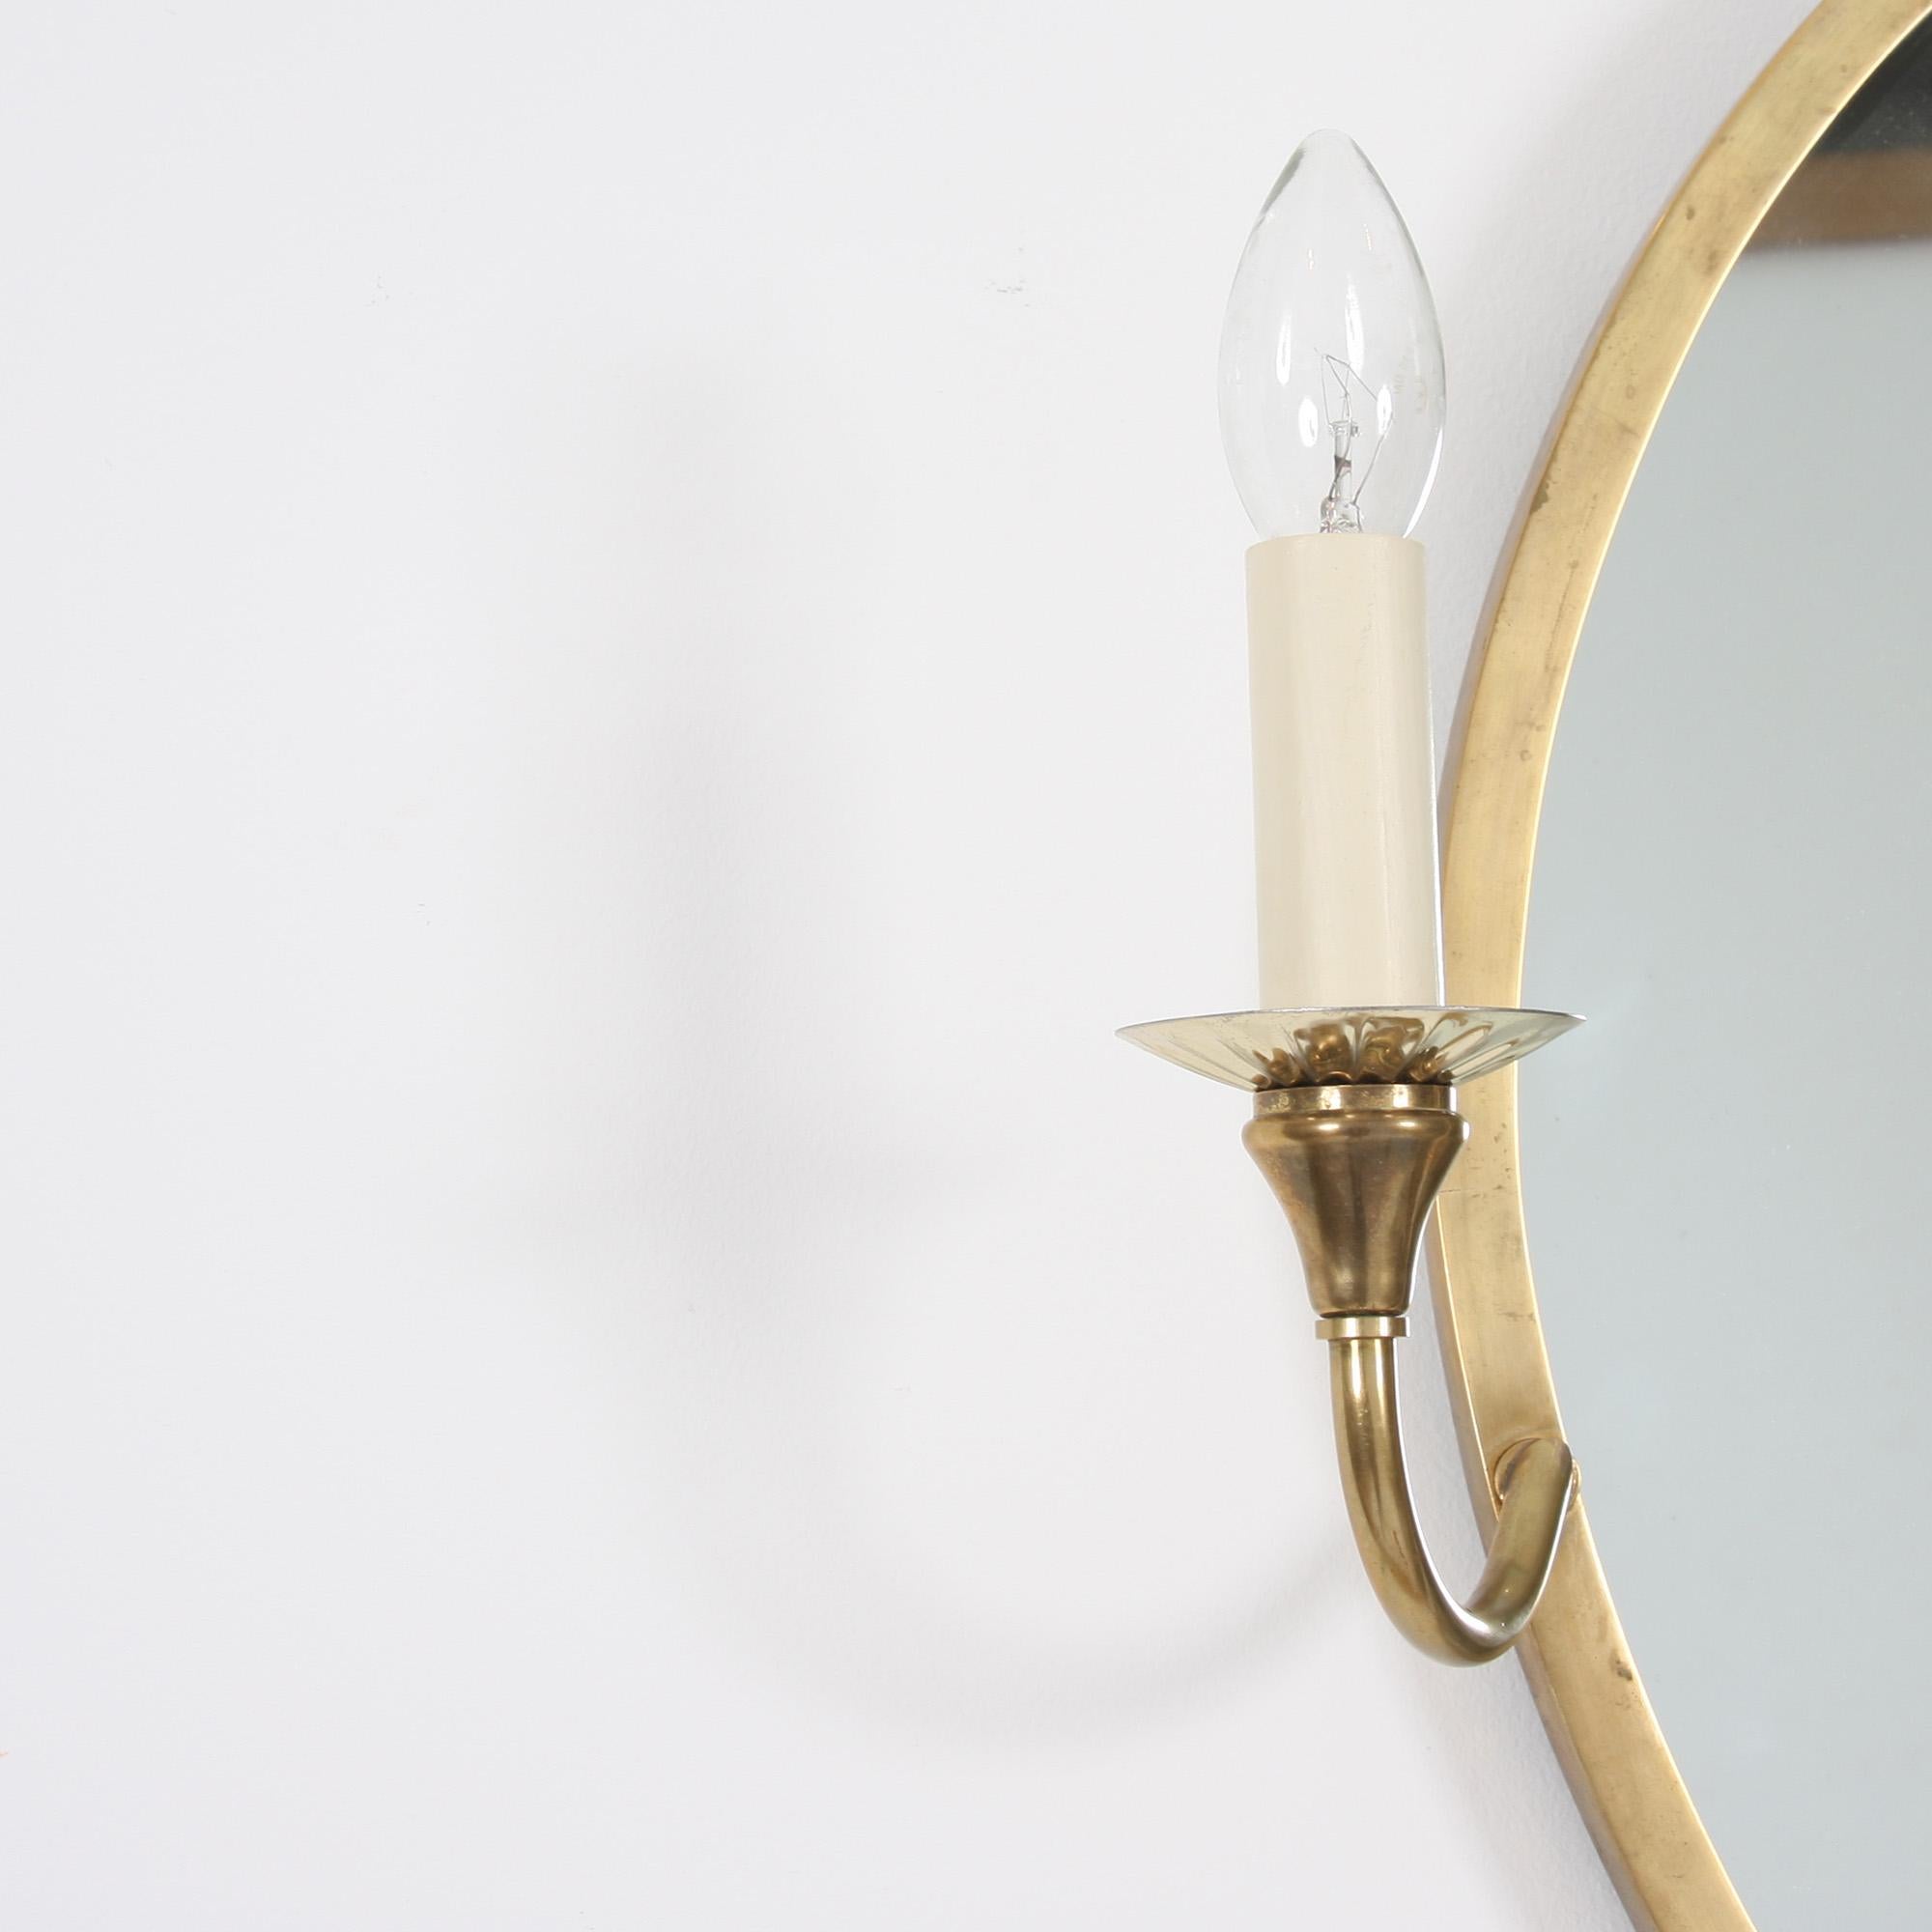 This beautiful brass oval-shaped mirror with rewired candle lights originates from 1960s, France.